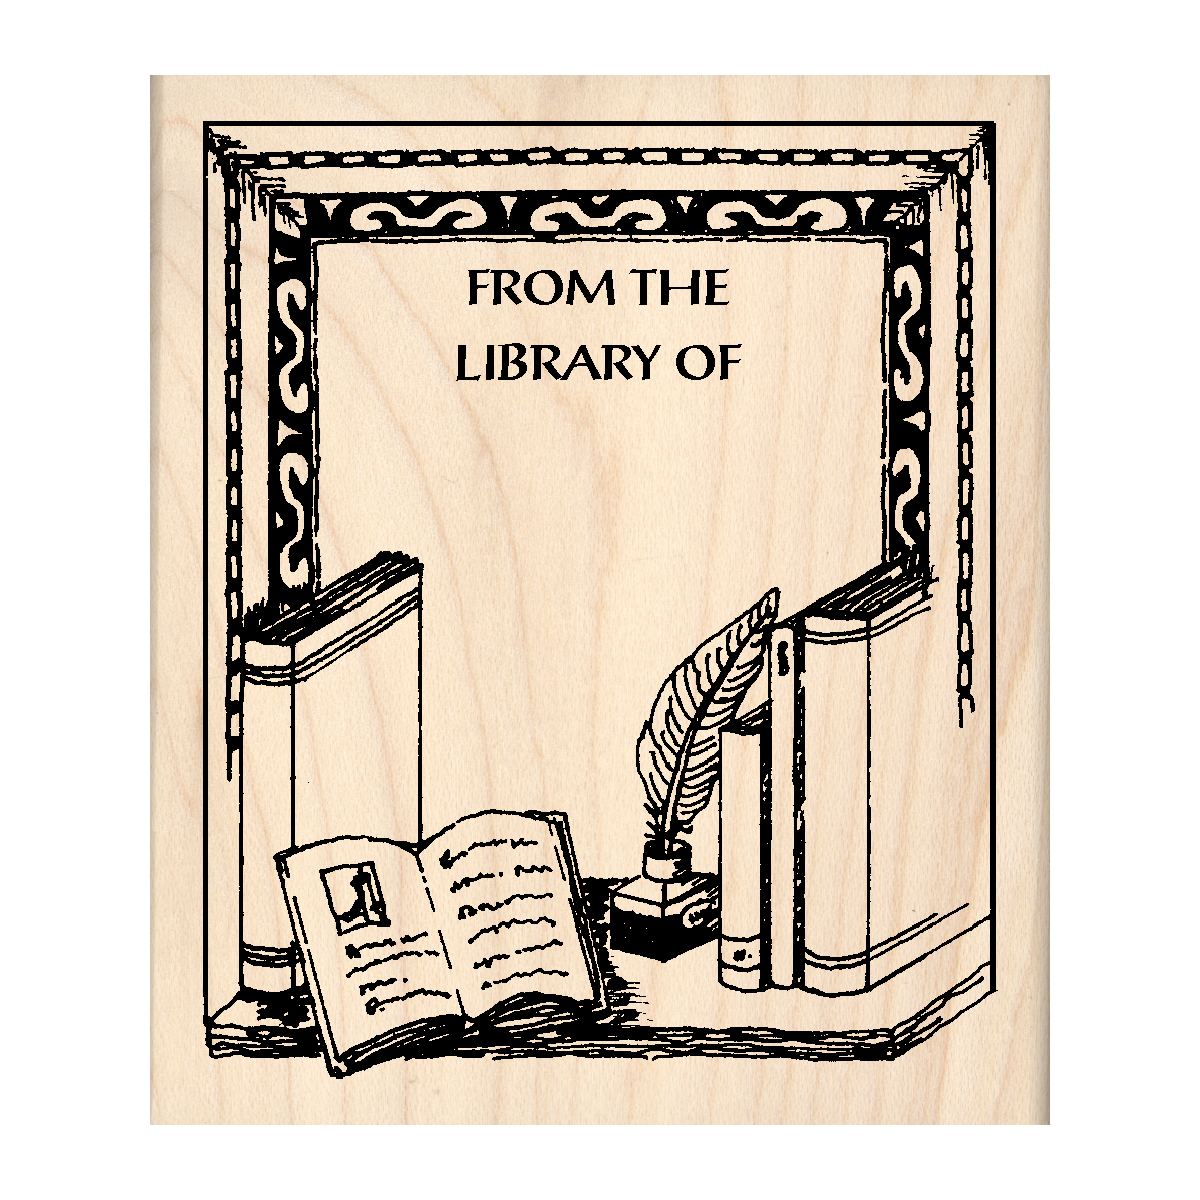 From The Library of: Bookplate Rubber Stamp 3" x 3.5" block